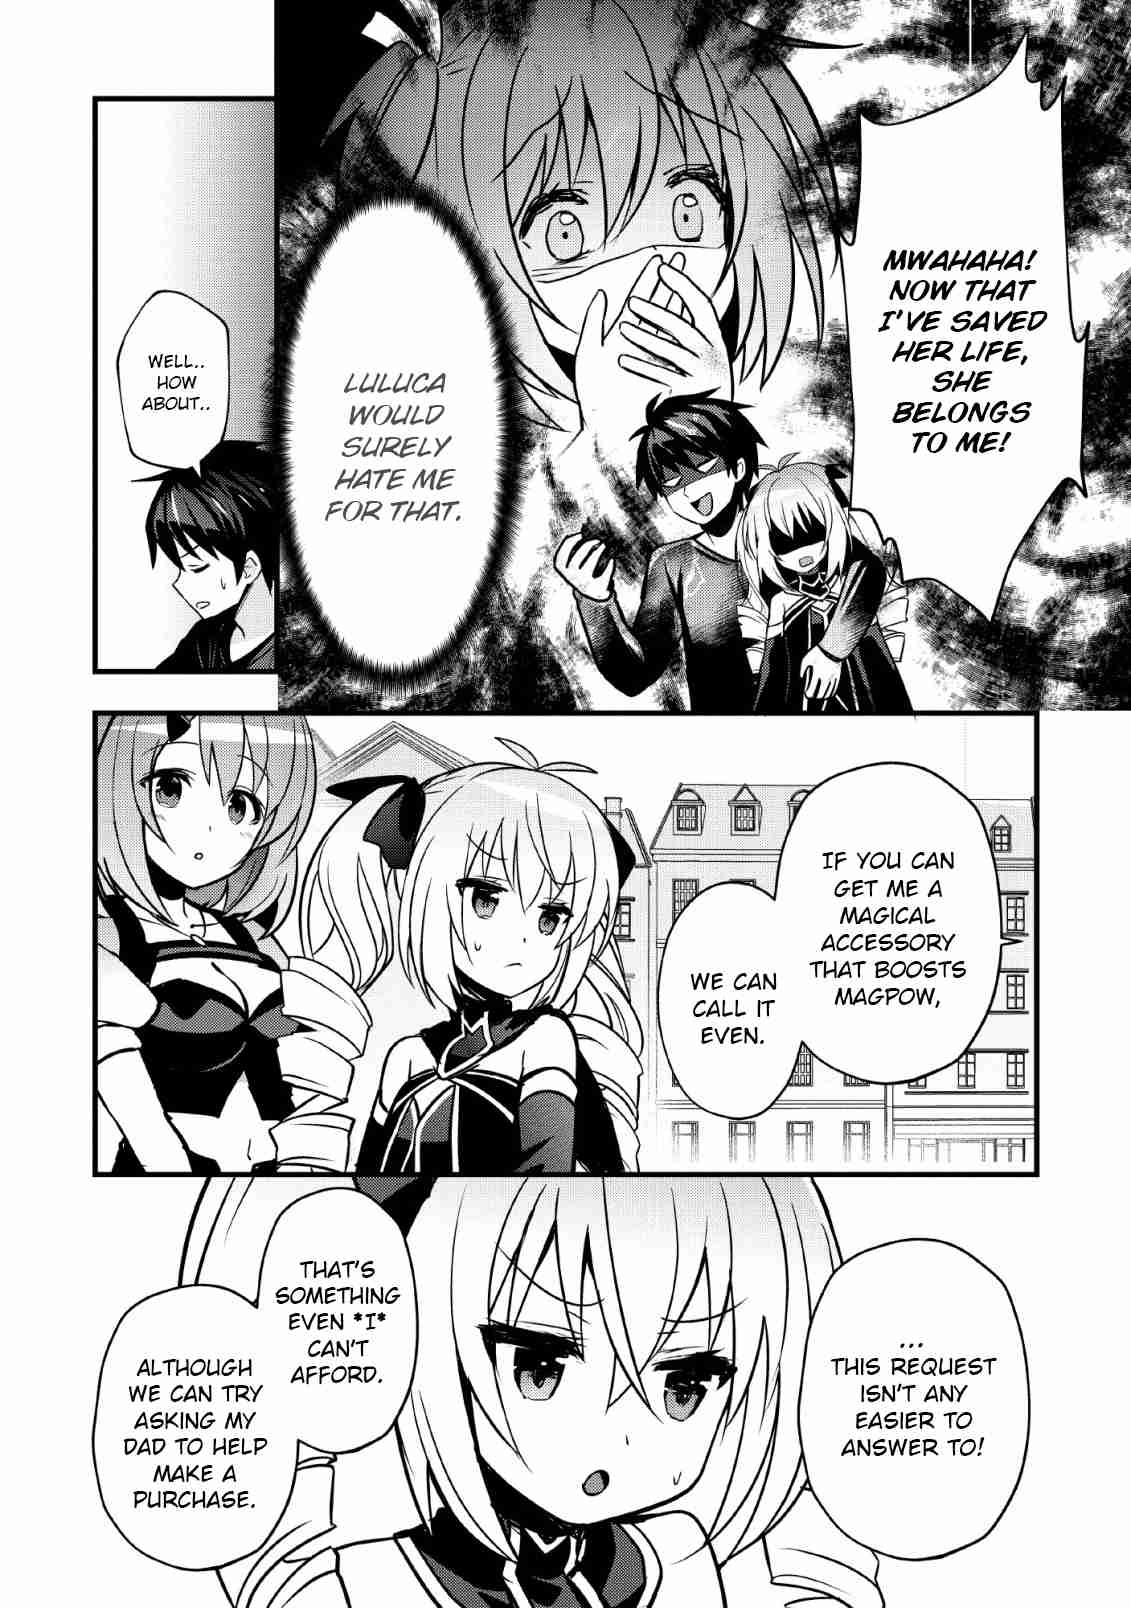 I Work As A Healer In Another World's Labyrinth City Vol. 3 Ch. 13